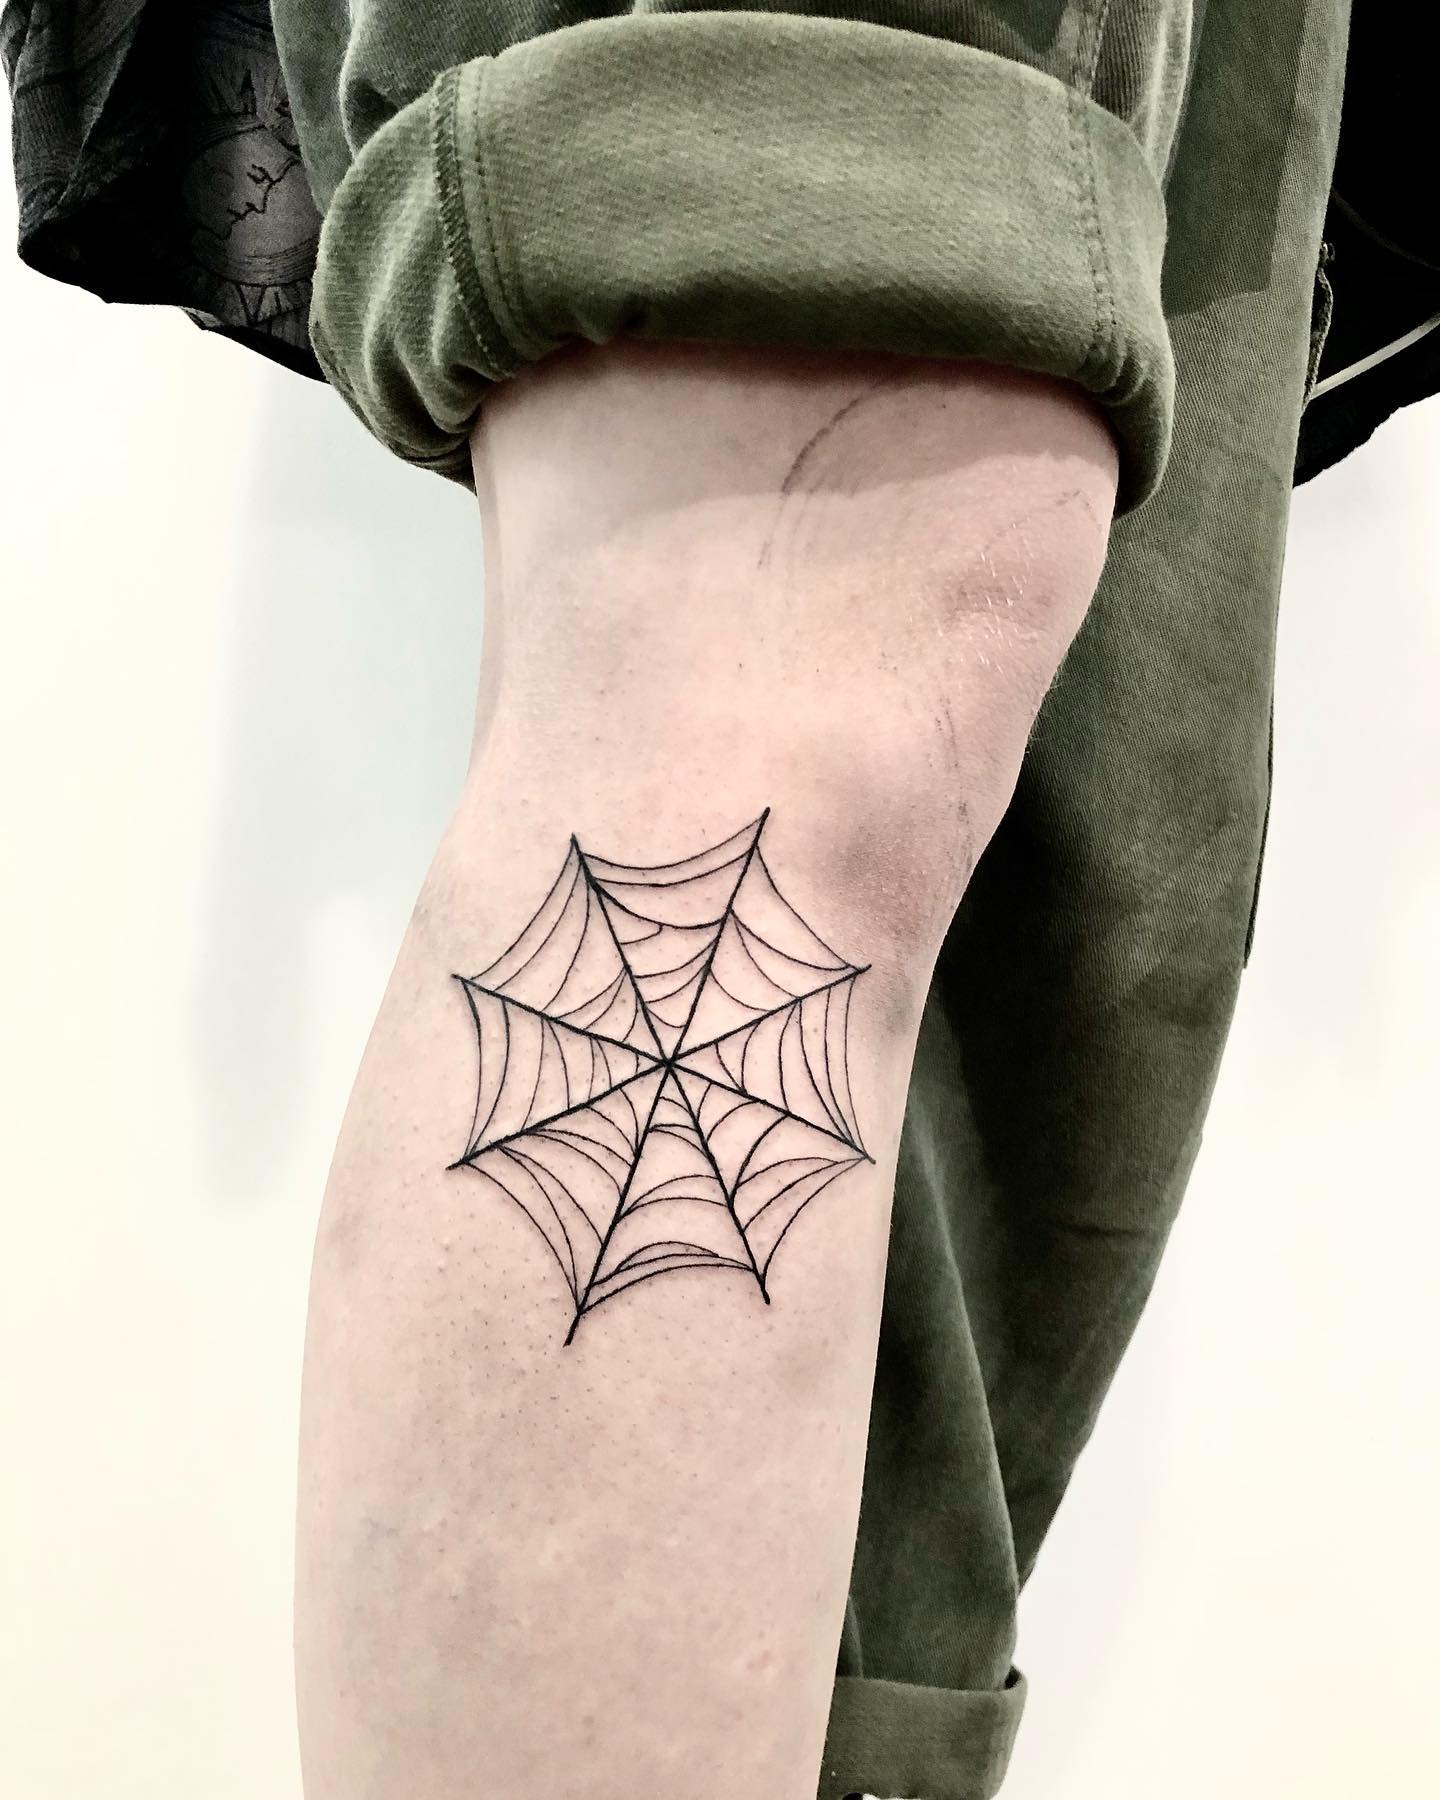 Web tattoo over your knee will suit most guys who like quirky trends and unusual placement options.